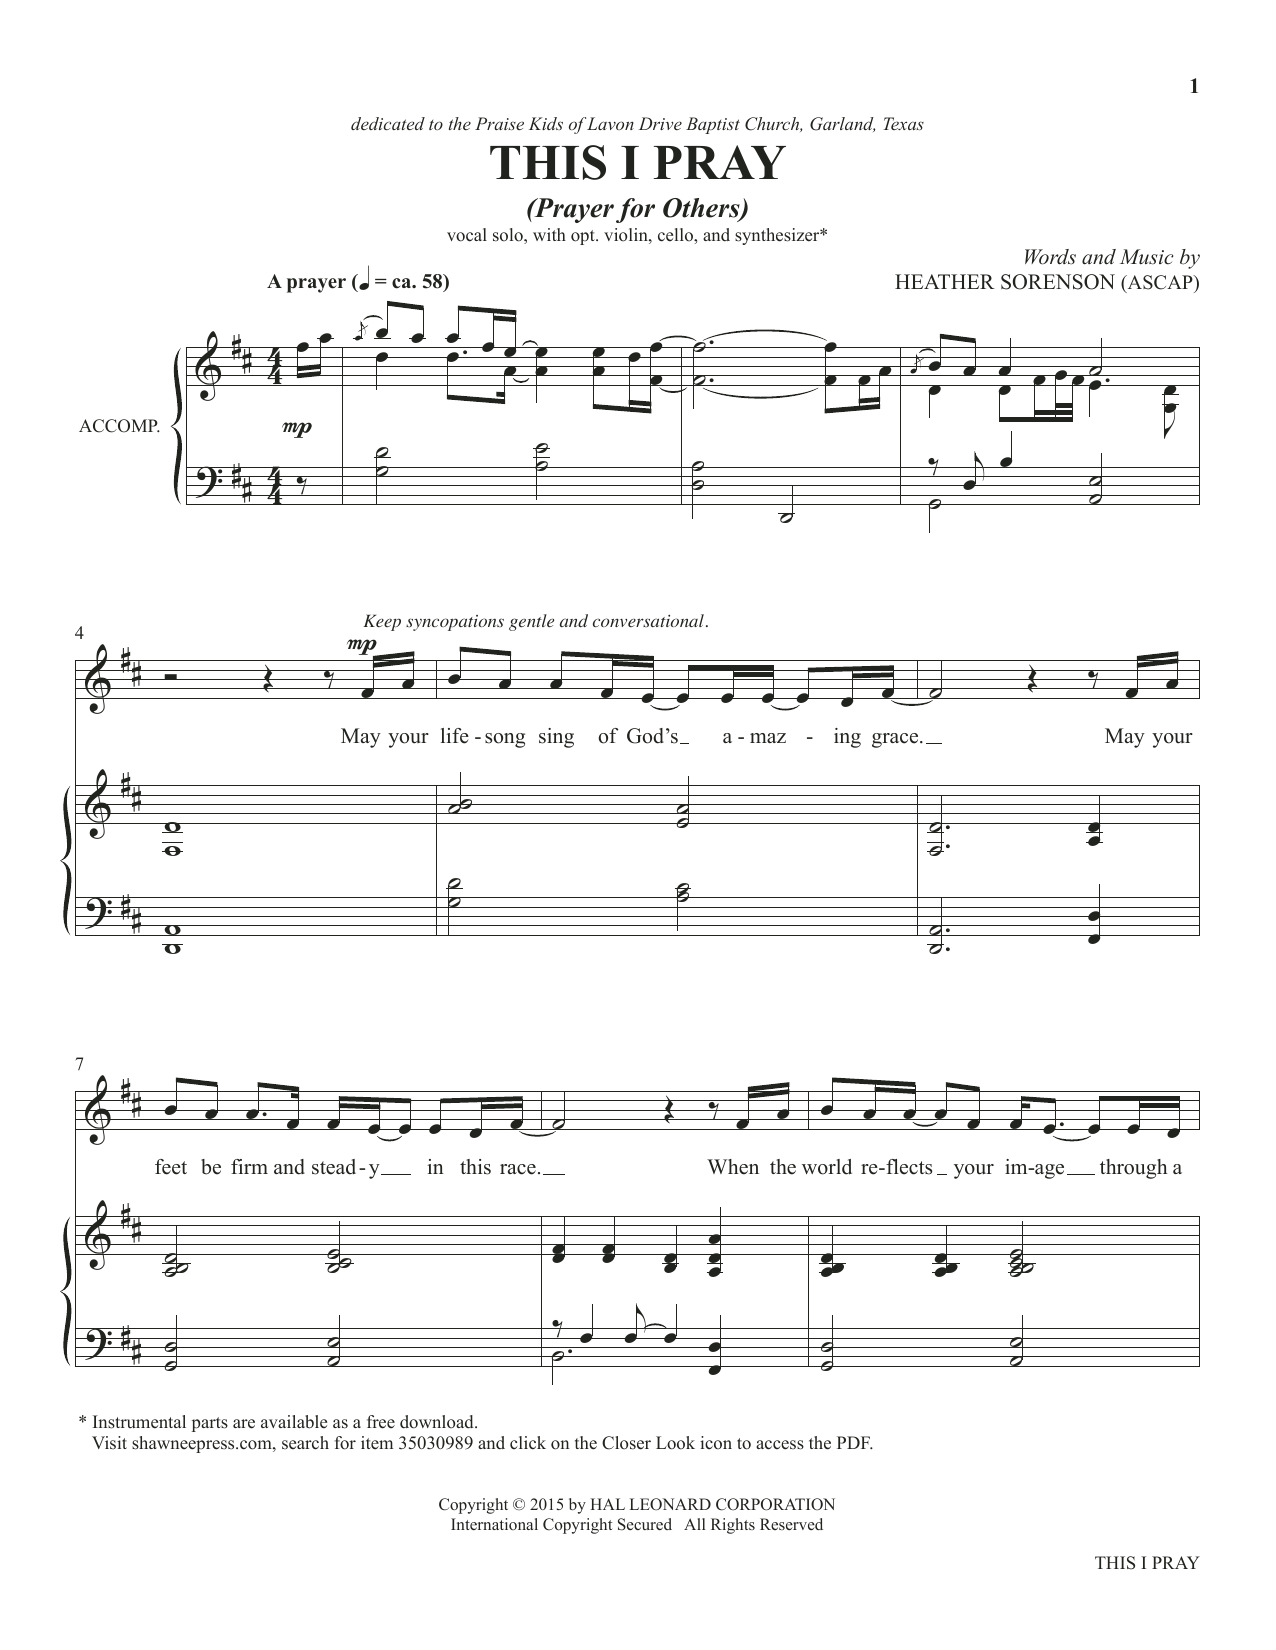 Download Heather Sorenson This I Pray (from The Prayer Project) Sheet Music